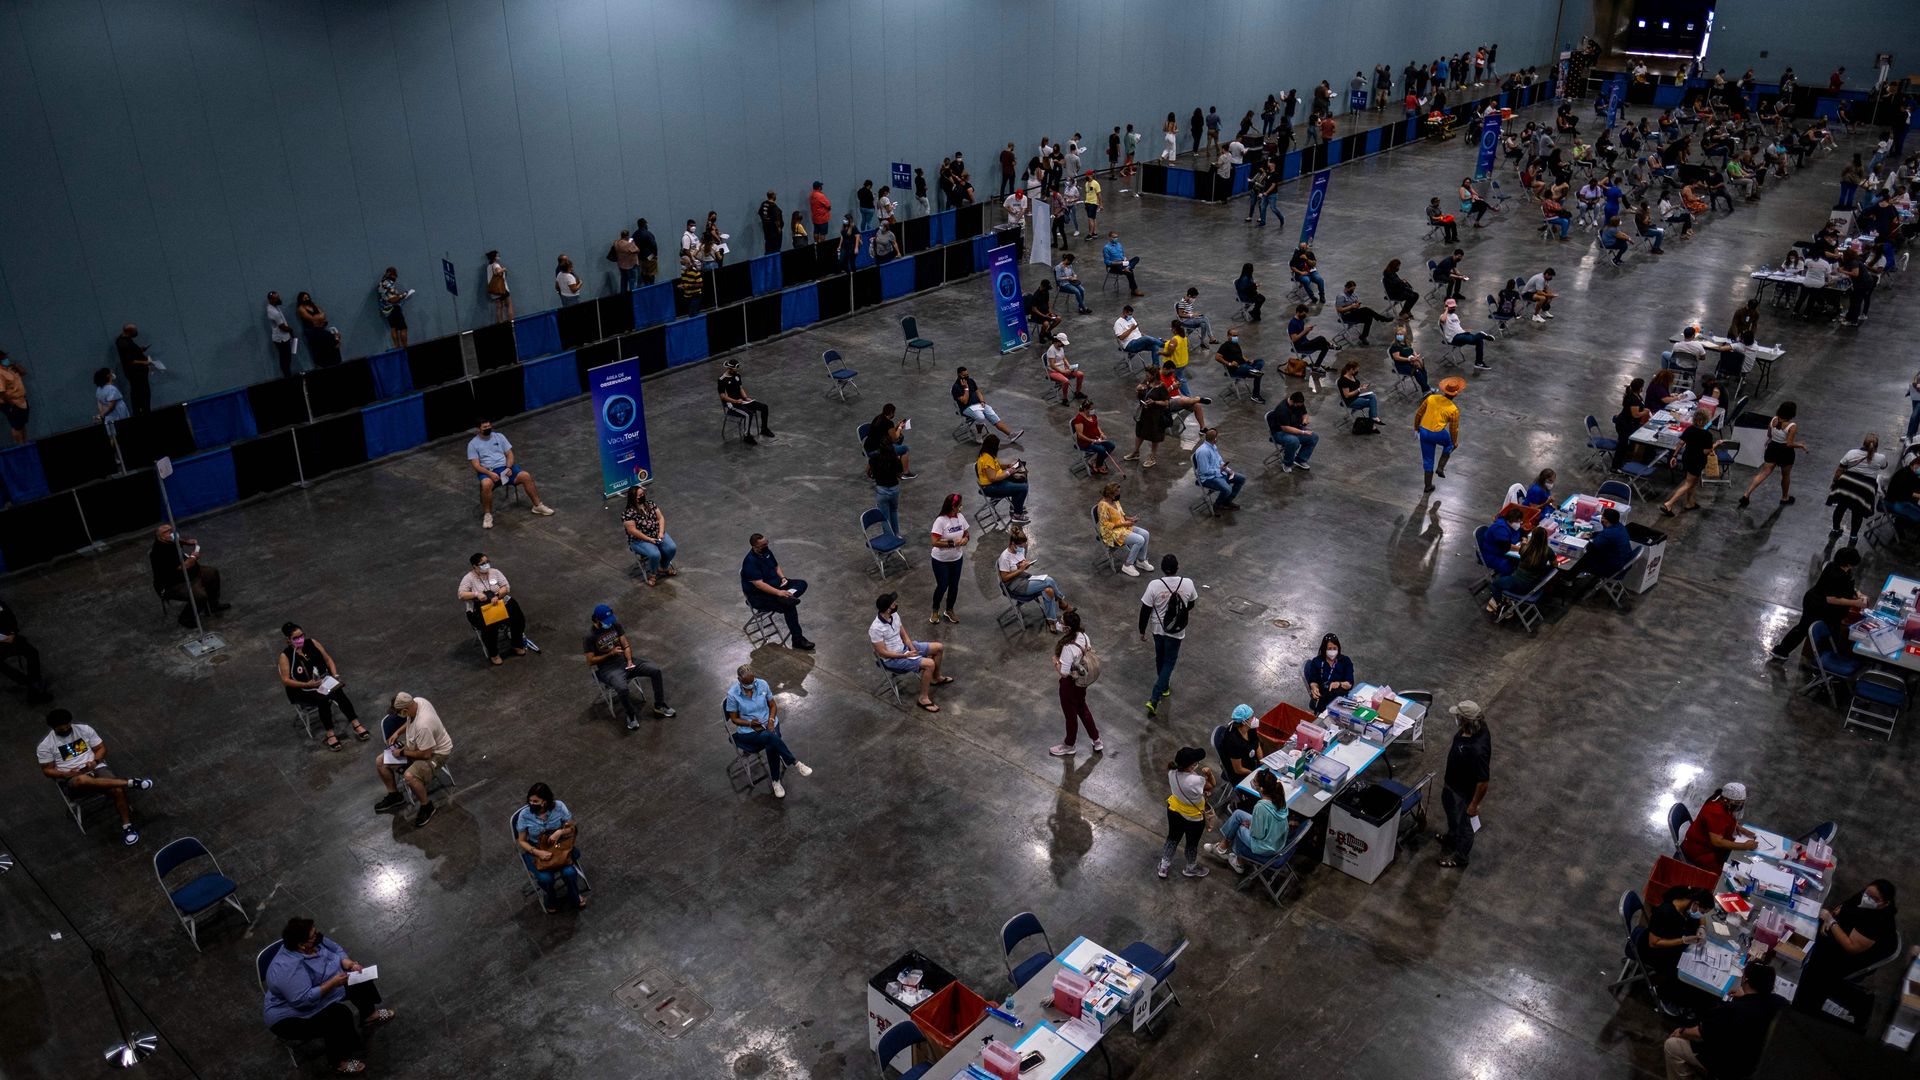 People attend the first mass vaccination event to get inoculated with the Johnson and Johnson Covid-19 vaccine at the Puerto Rico Convention Center in San Juan, Puerto Rico on March 31, 2021.